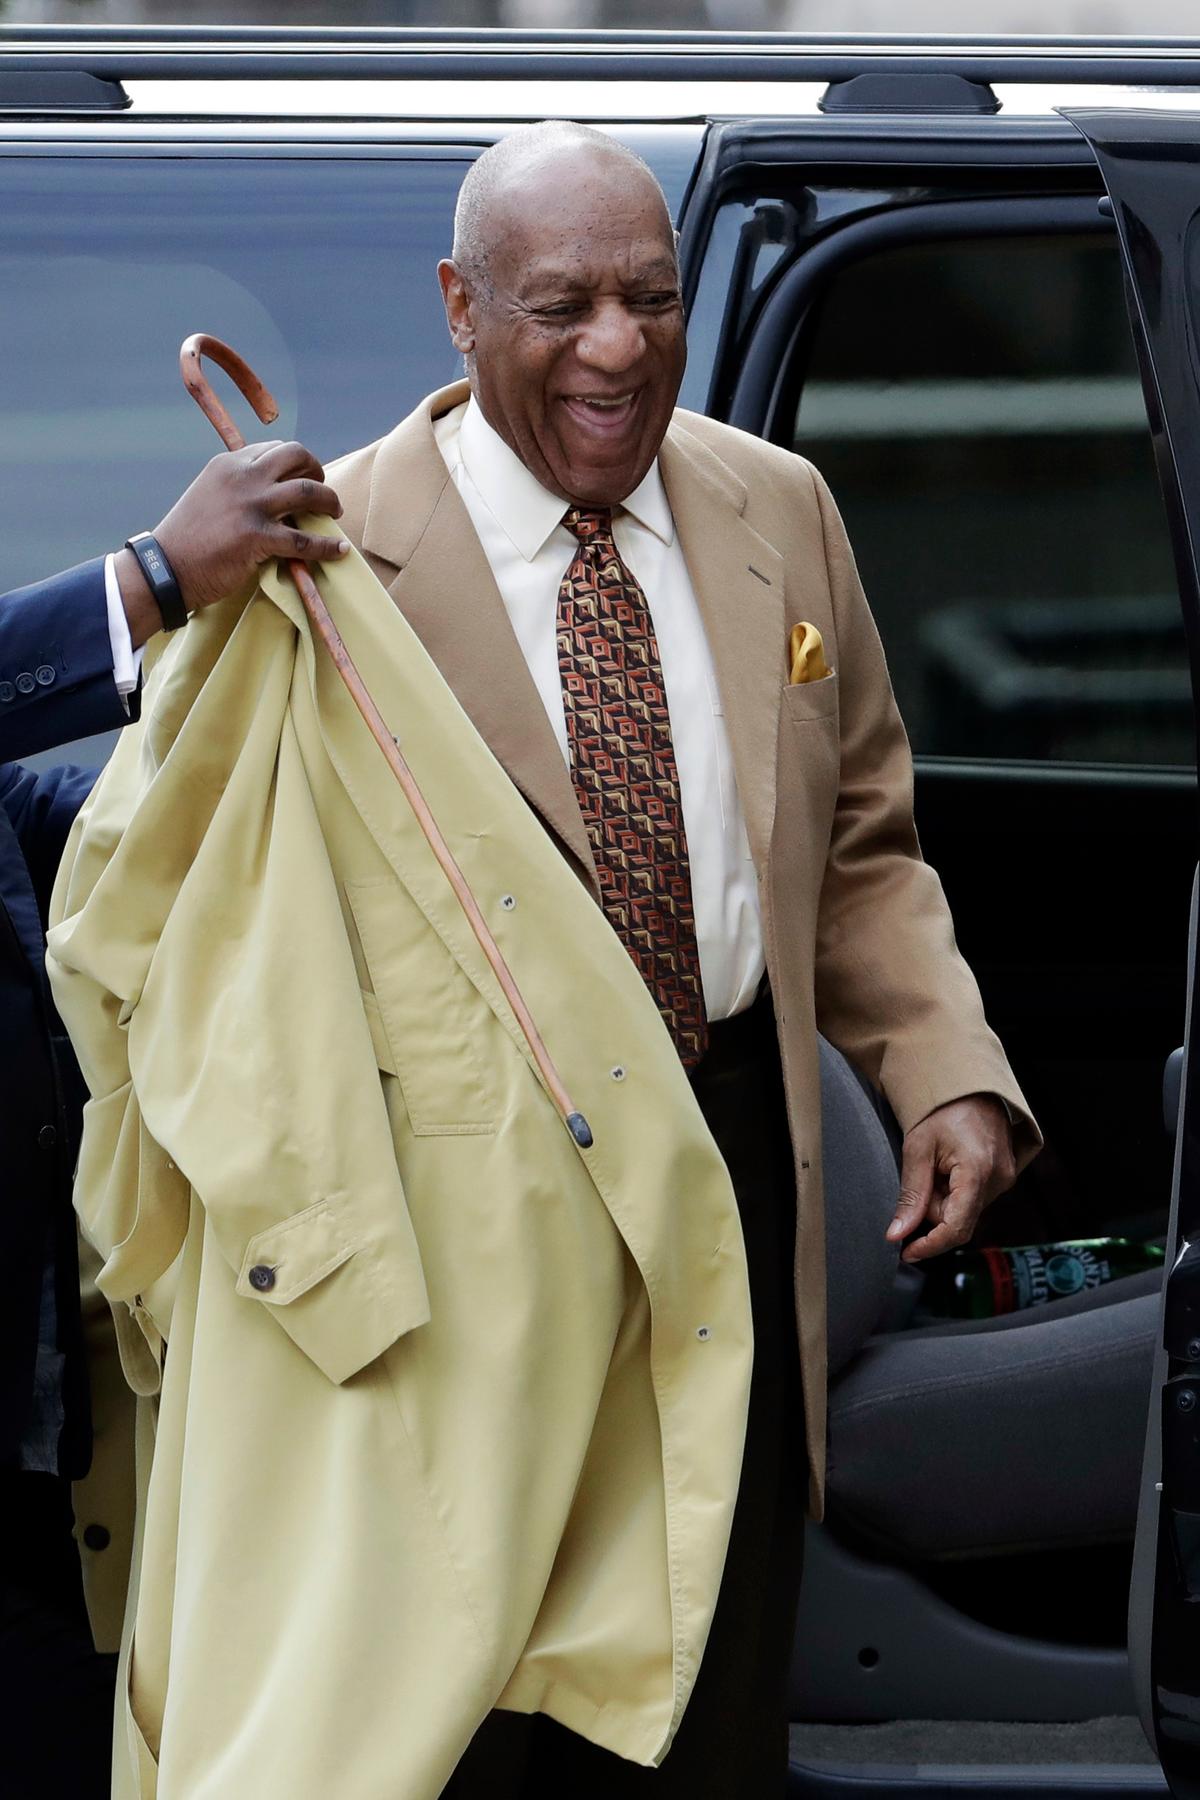 Bill Cosby arrives at the Montgomery County Courthouse in Norristown, Pa., on Feb. 27, 2017. (AP Photo/Matt Slocum)